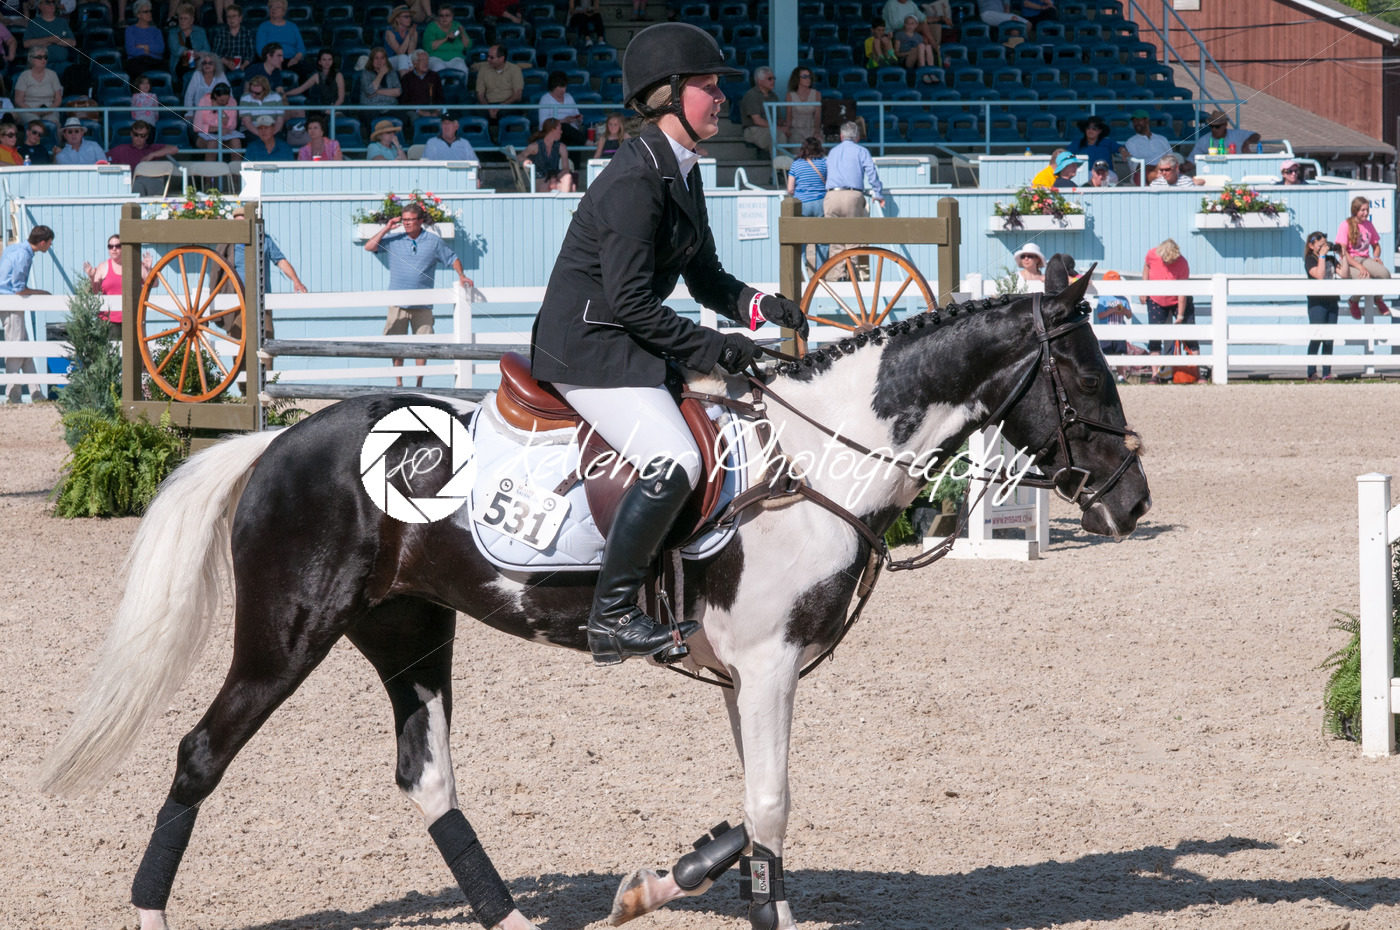 DEVON, PA – MAY 25: Riders performing with their horses at the Devon Horse Show on May 25, 2014 - Kelleher Photography Store